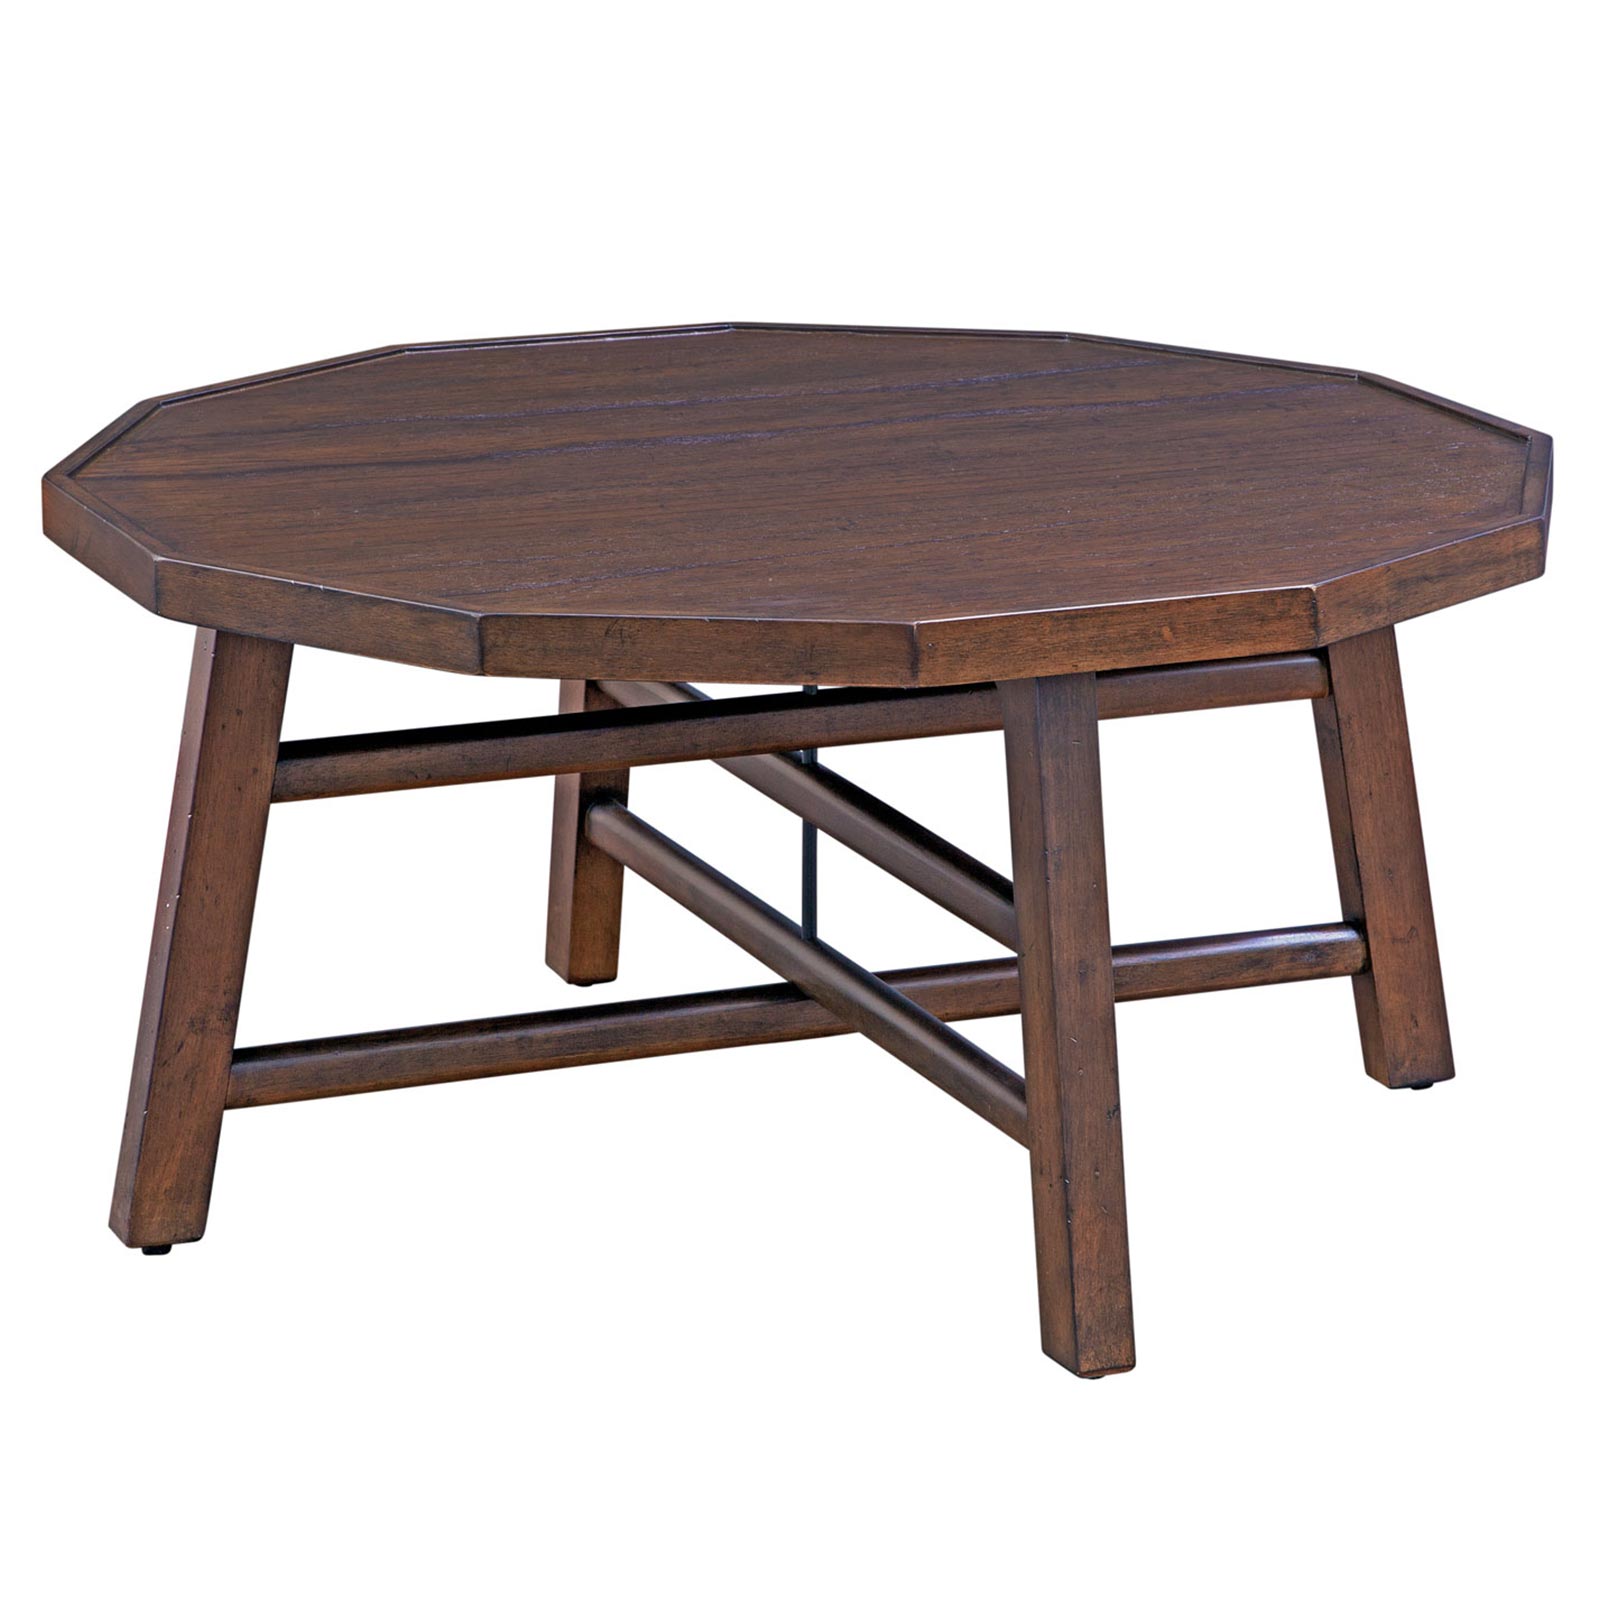 Steve Silver Co. Paisley Brown Round Cocktail Table